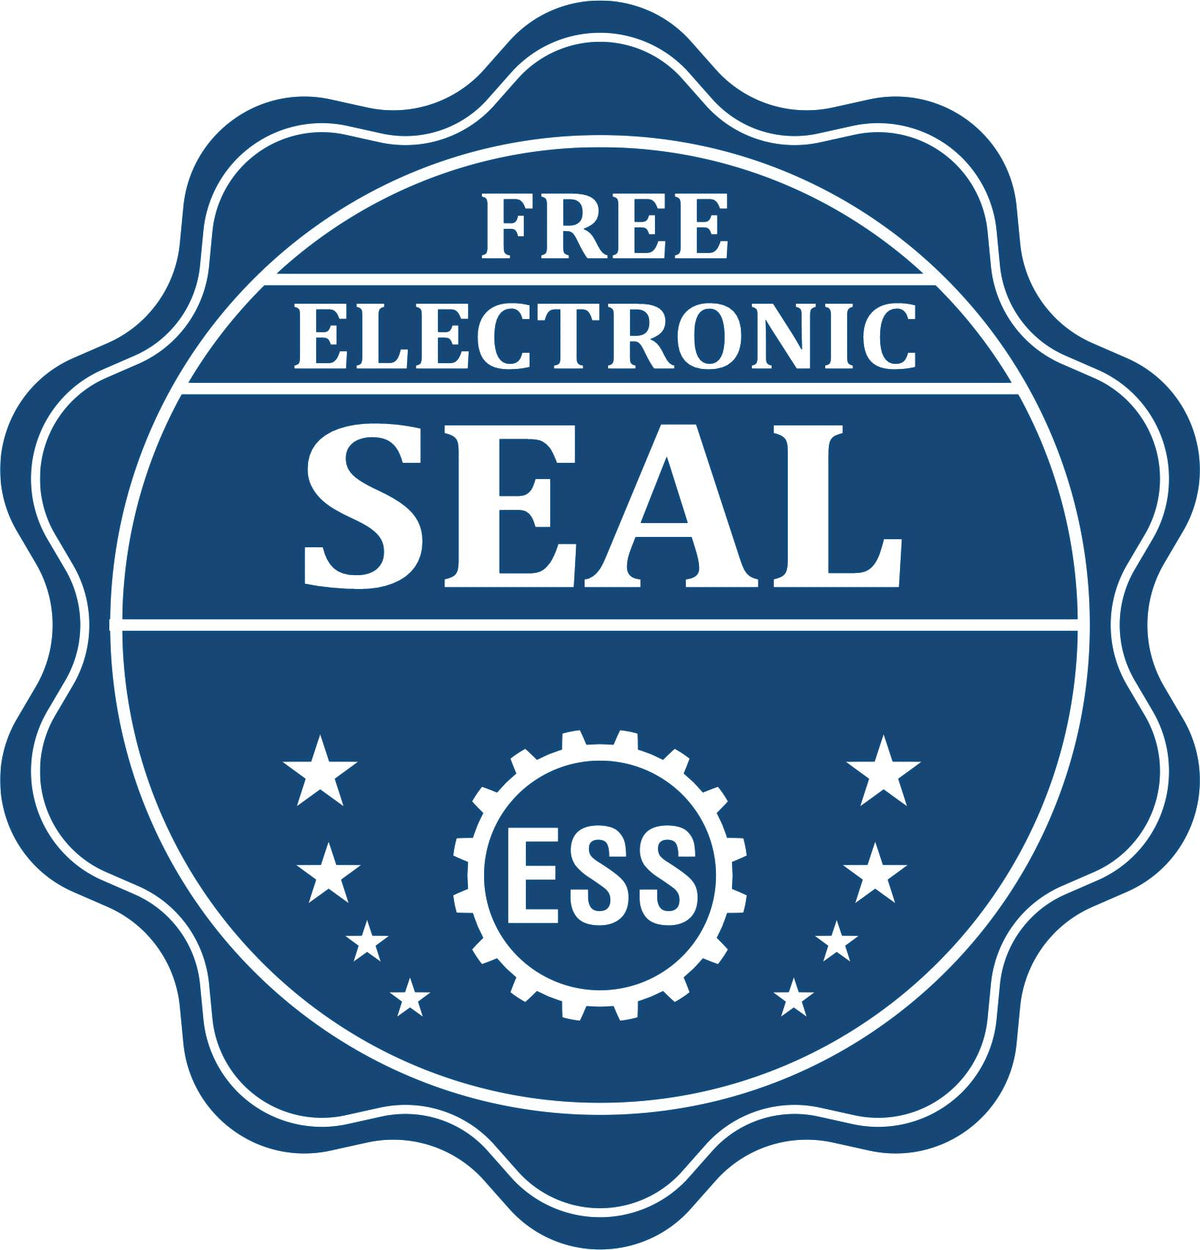 A badge showing a free electronic seal for the State of Guam Extended Long Reach Geologist Seal with stars and the ESS gear on the emblem.